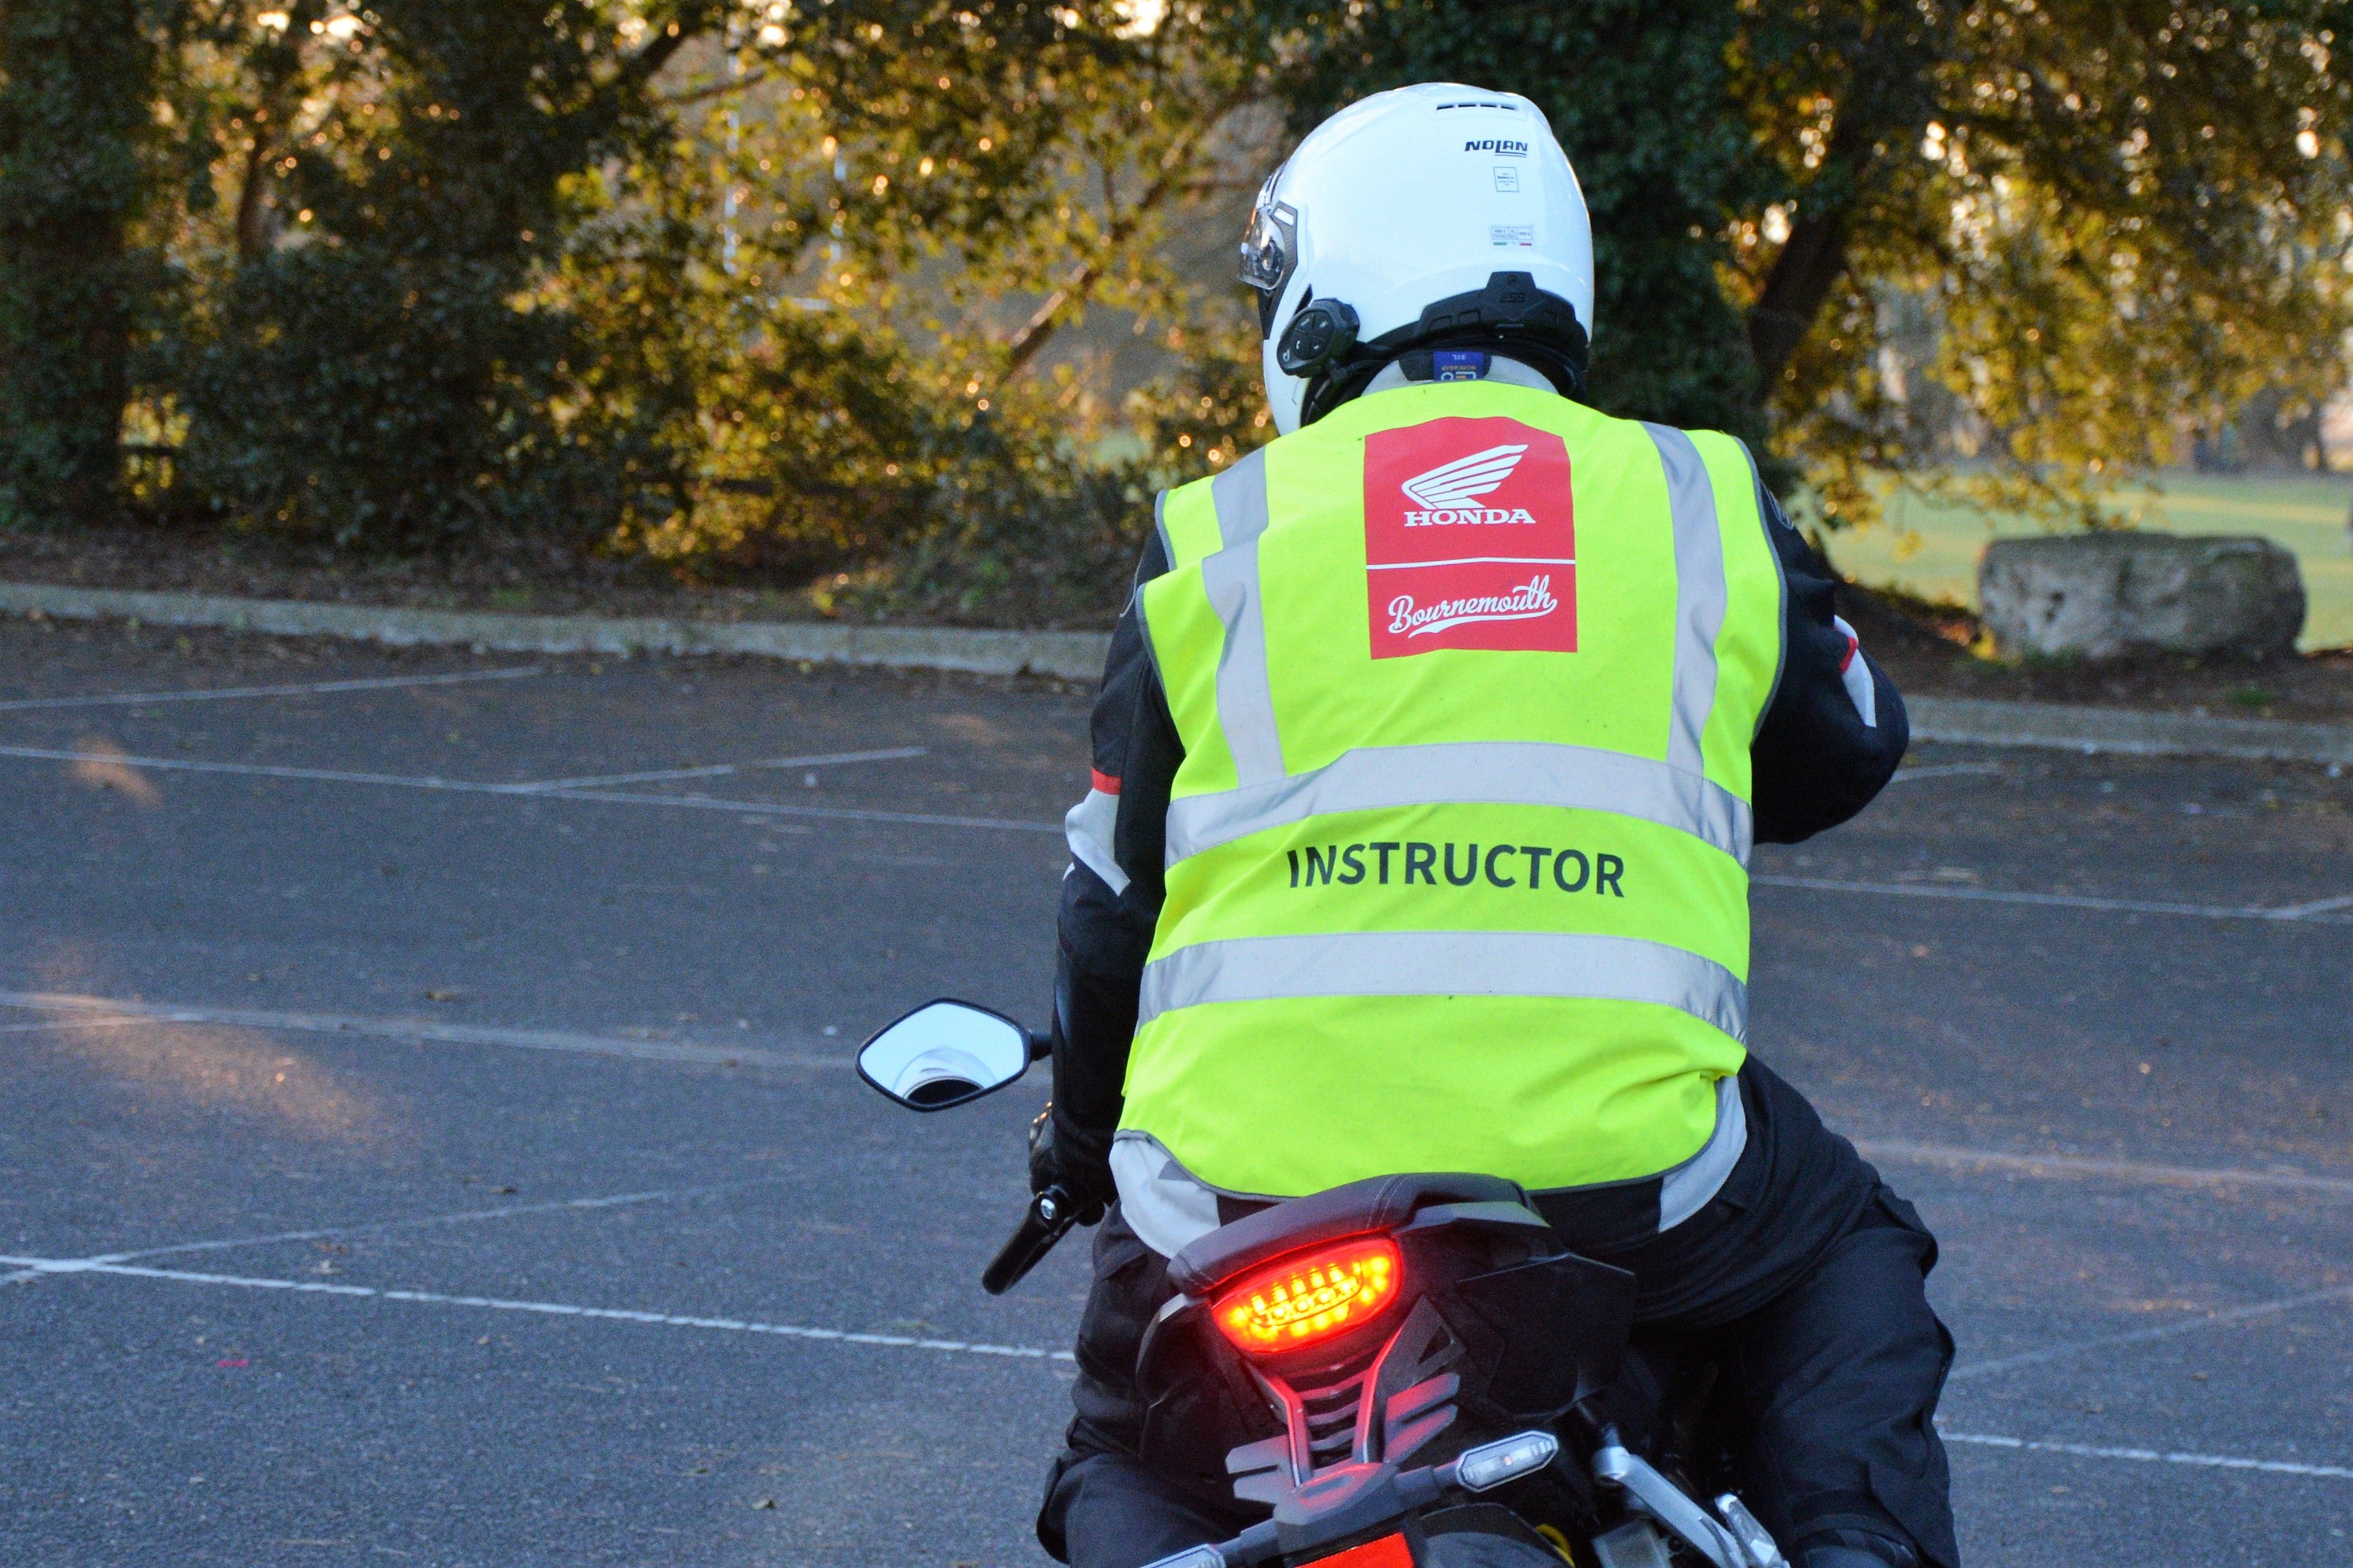 Motorcycle training in bournemouth | What's included